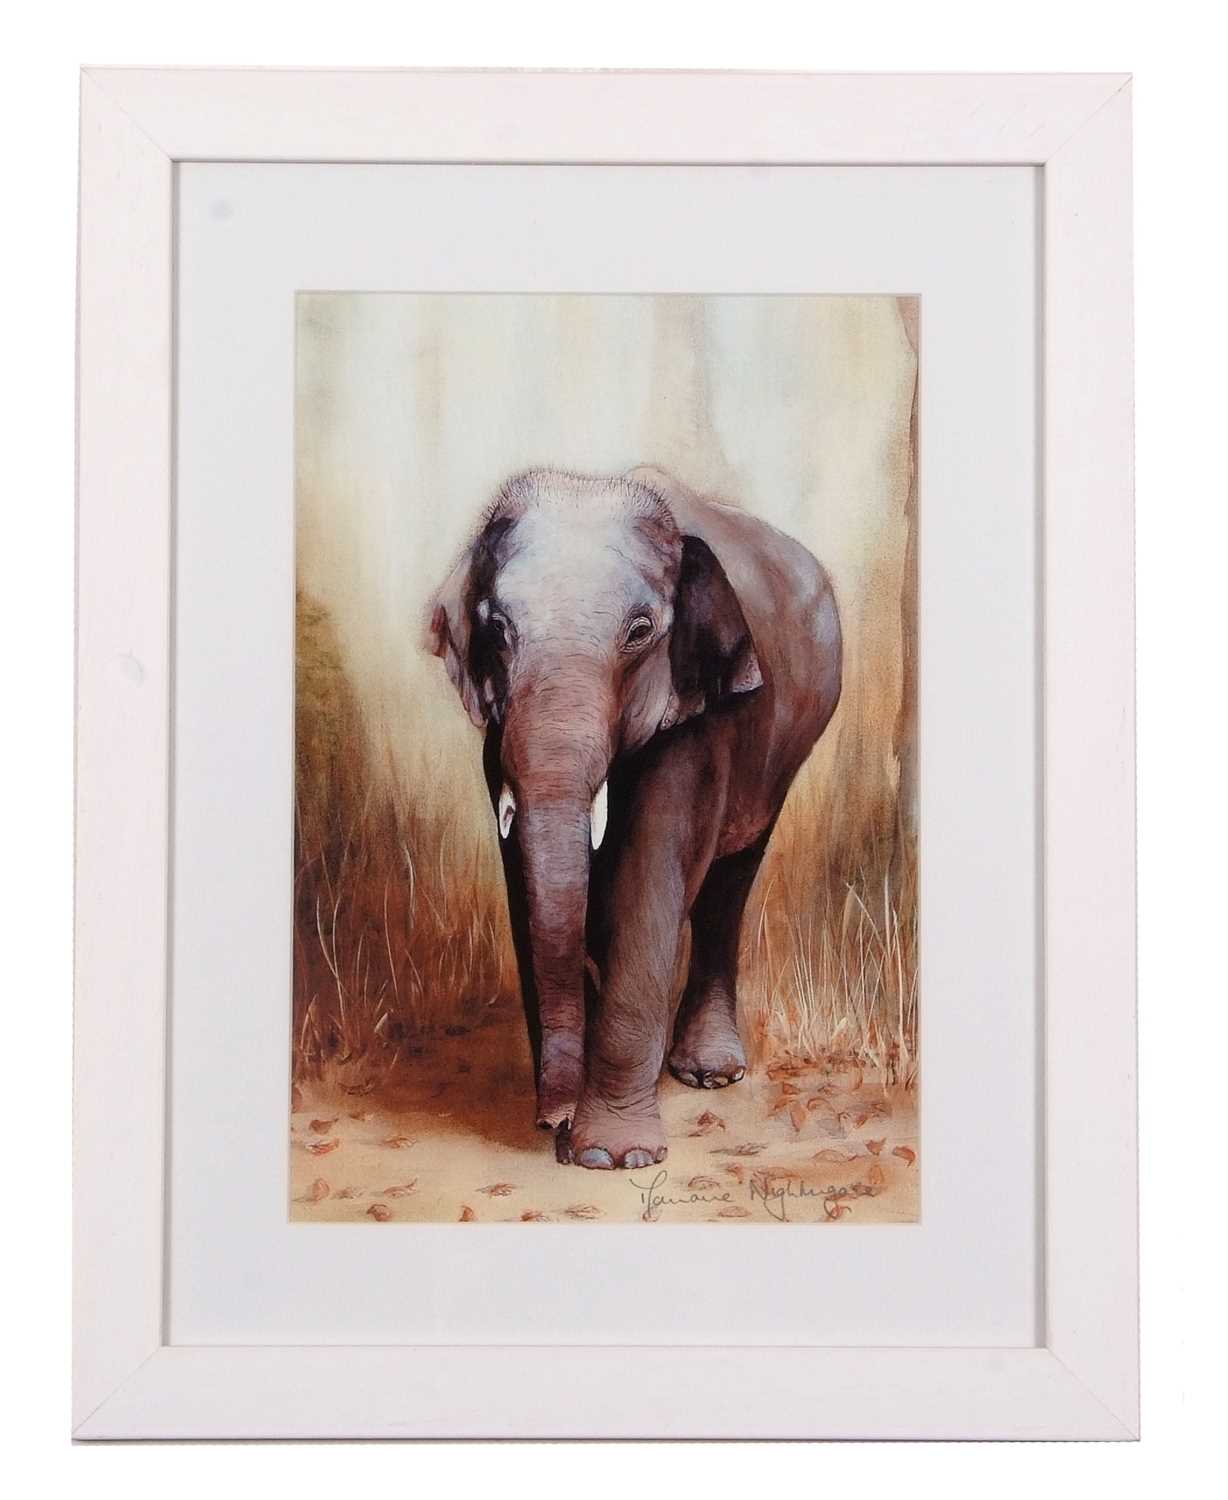 M. Nightingale: 'Rajan' retired logging elephant and baby elephant, lithographs in colours, unframed - Image 2 of 2